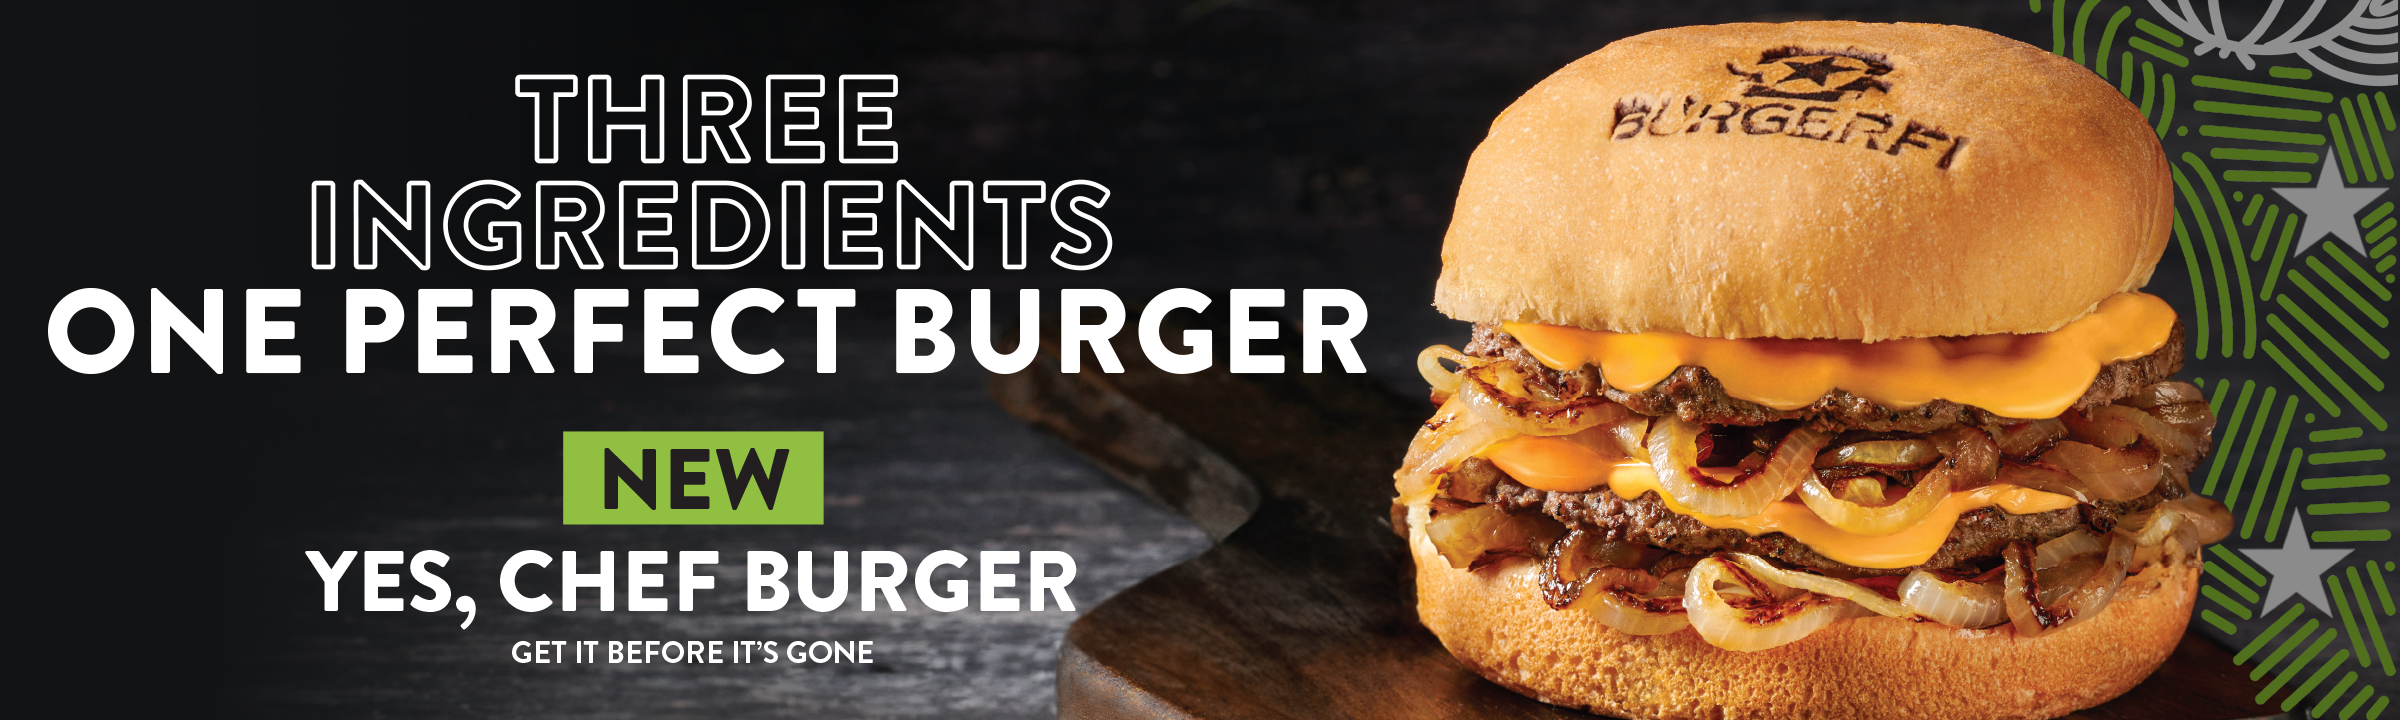 BurgerFi I Chef-Crafted Burgers, Fresh-Cut Fries, and Craft Beer